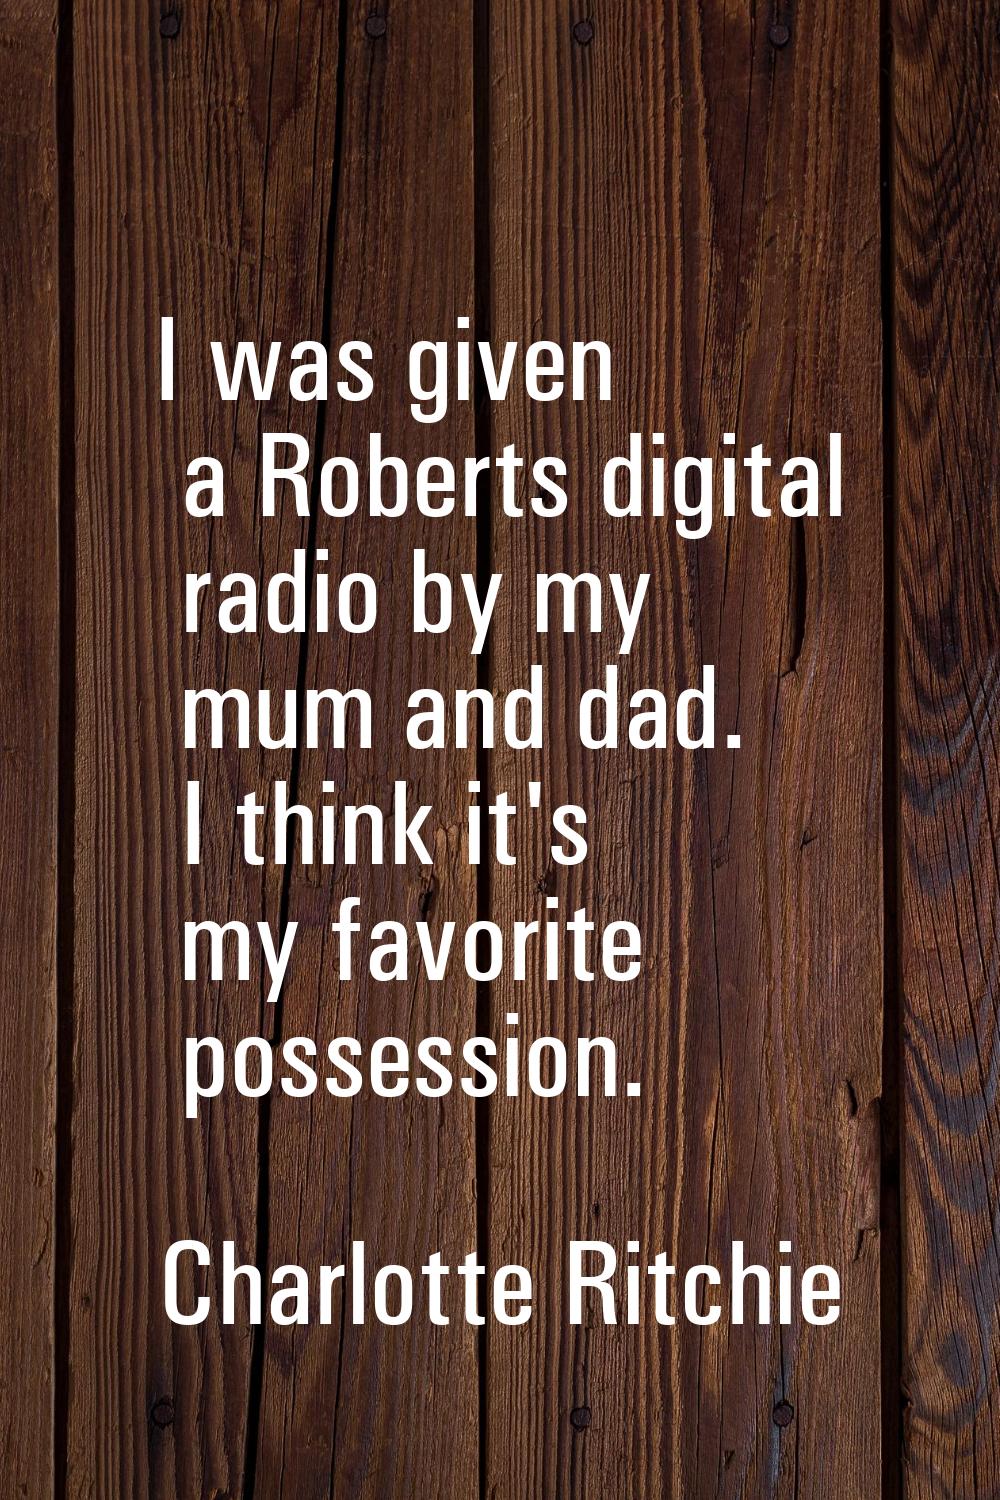 I was given a Roberts digital radio by my mum and dad. I think it's my favorite possession.